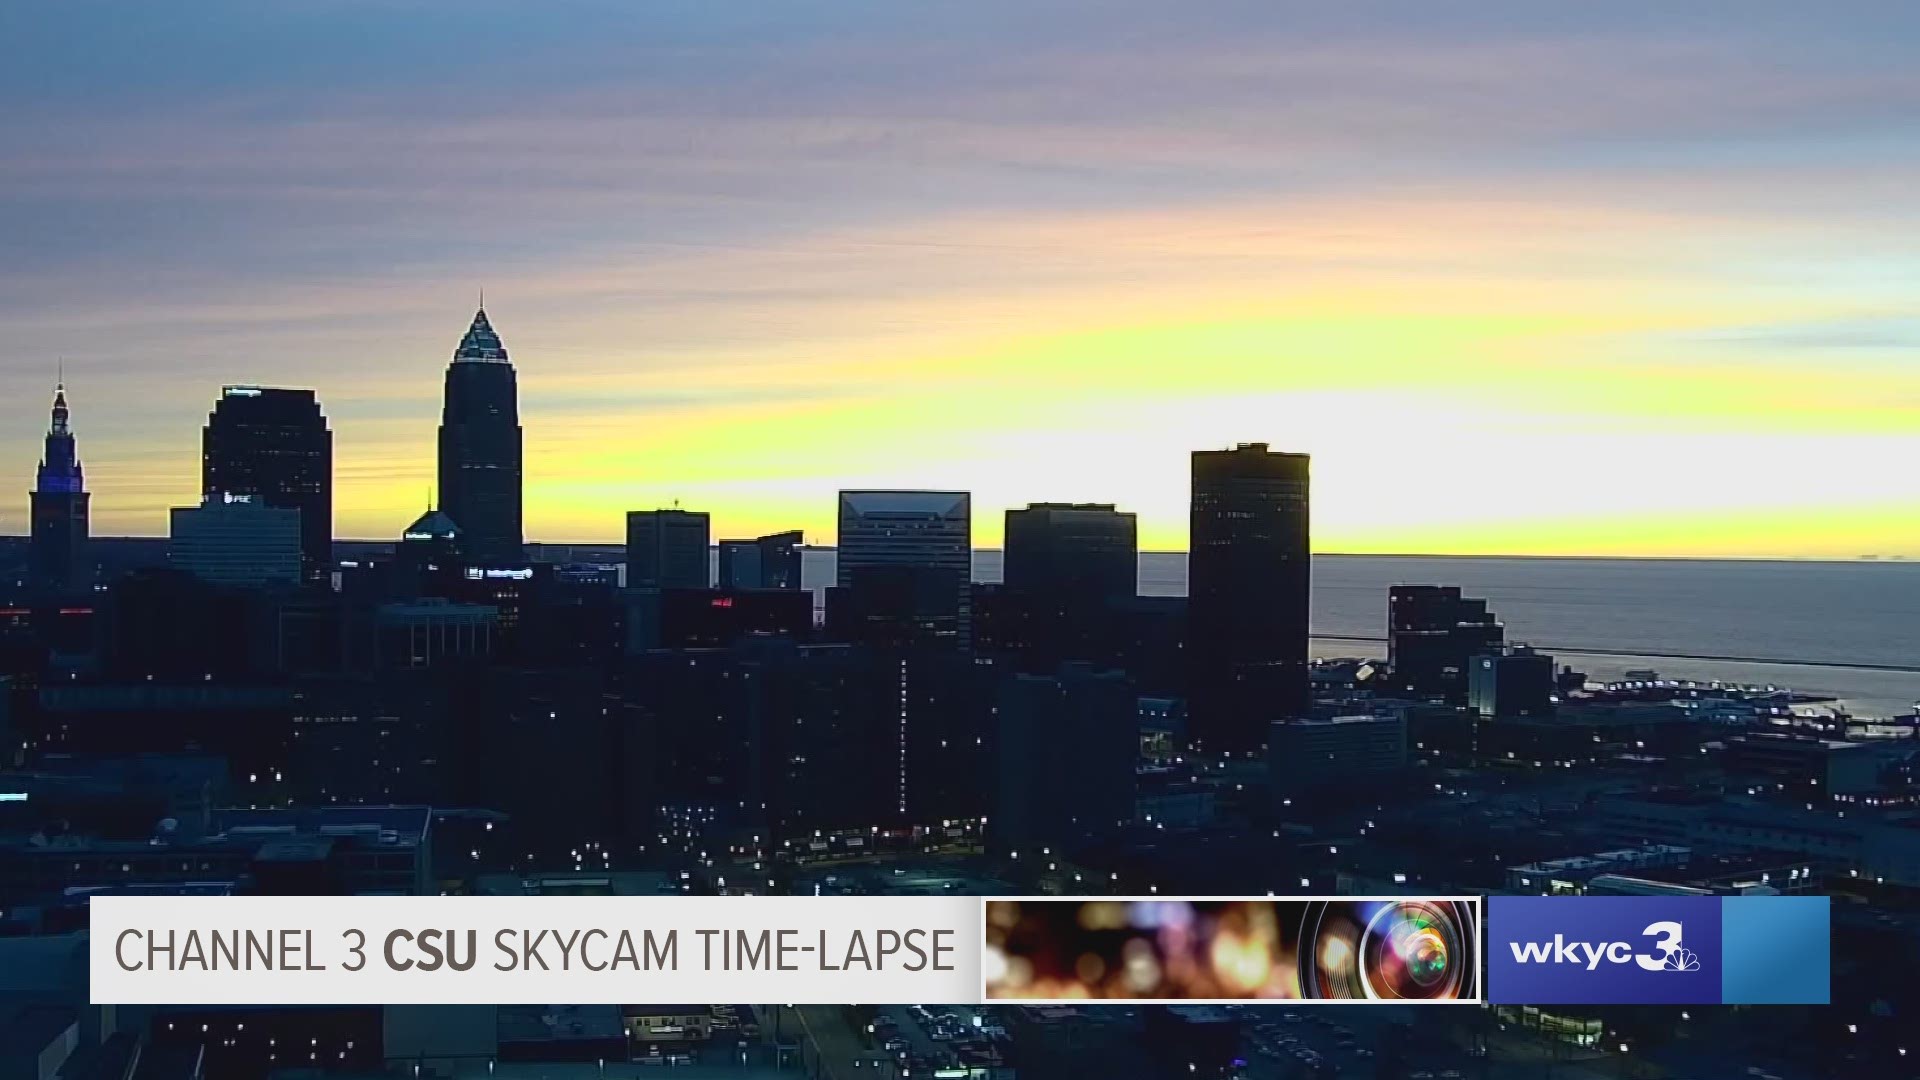 It's Friday night and that means great looking Cleveland sunsets like the one we had tonight! If you missed it, here it is in :30 seconds. #weather